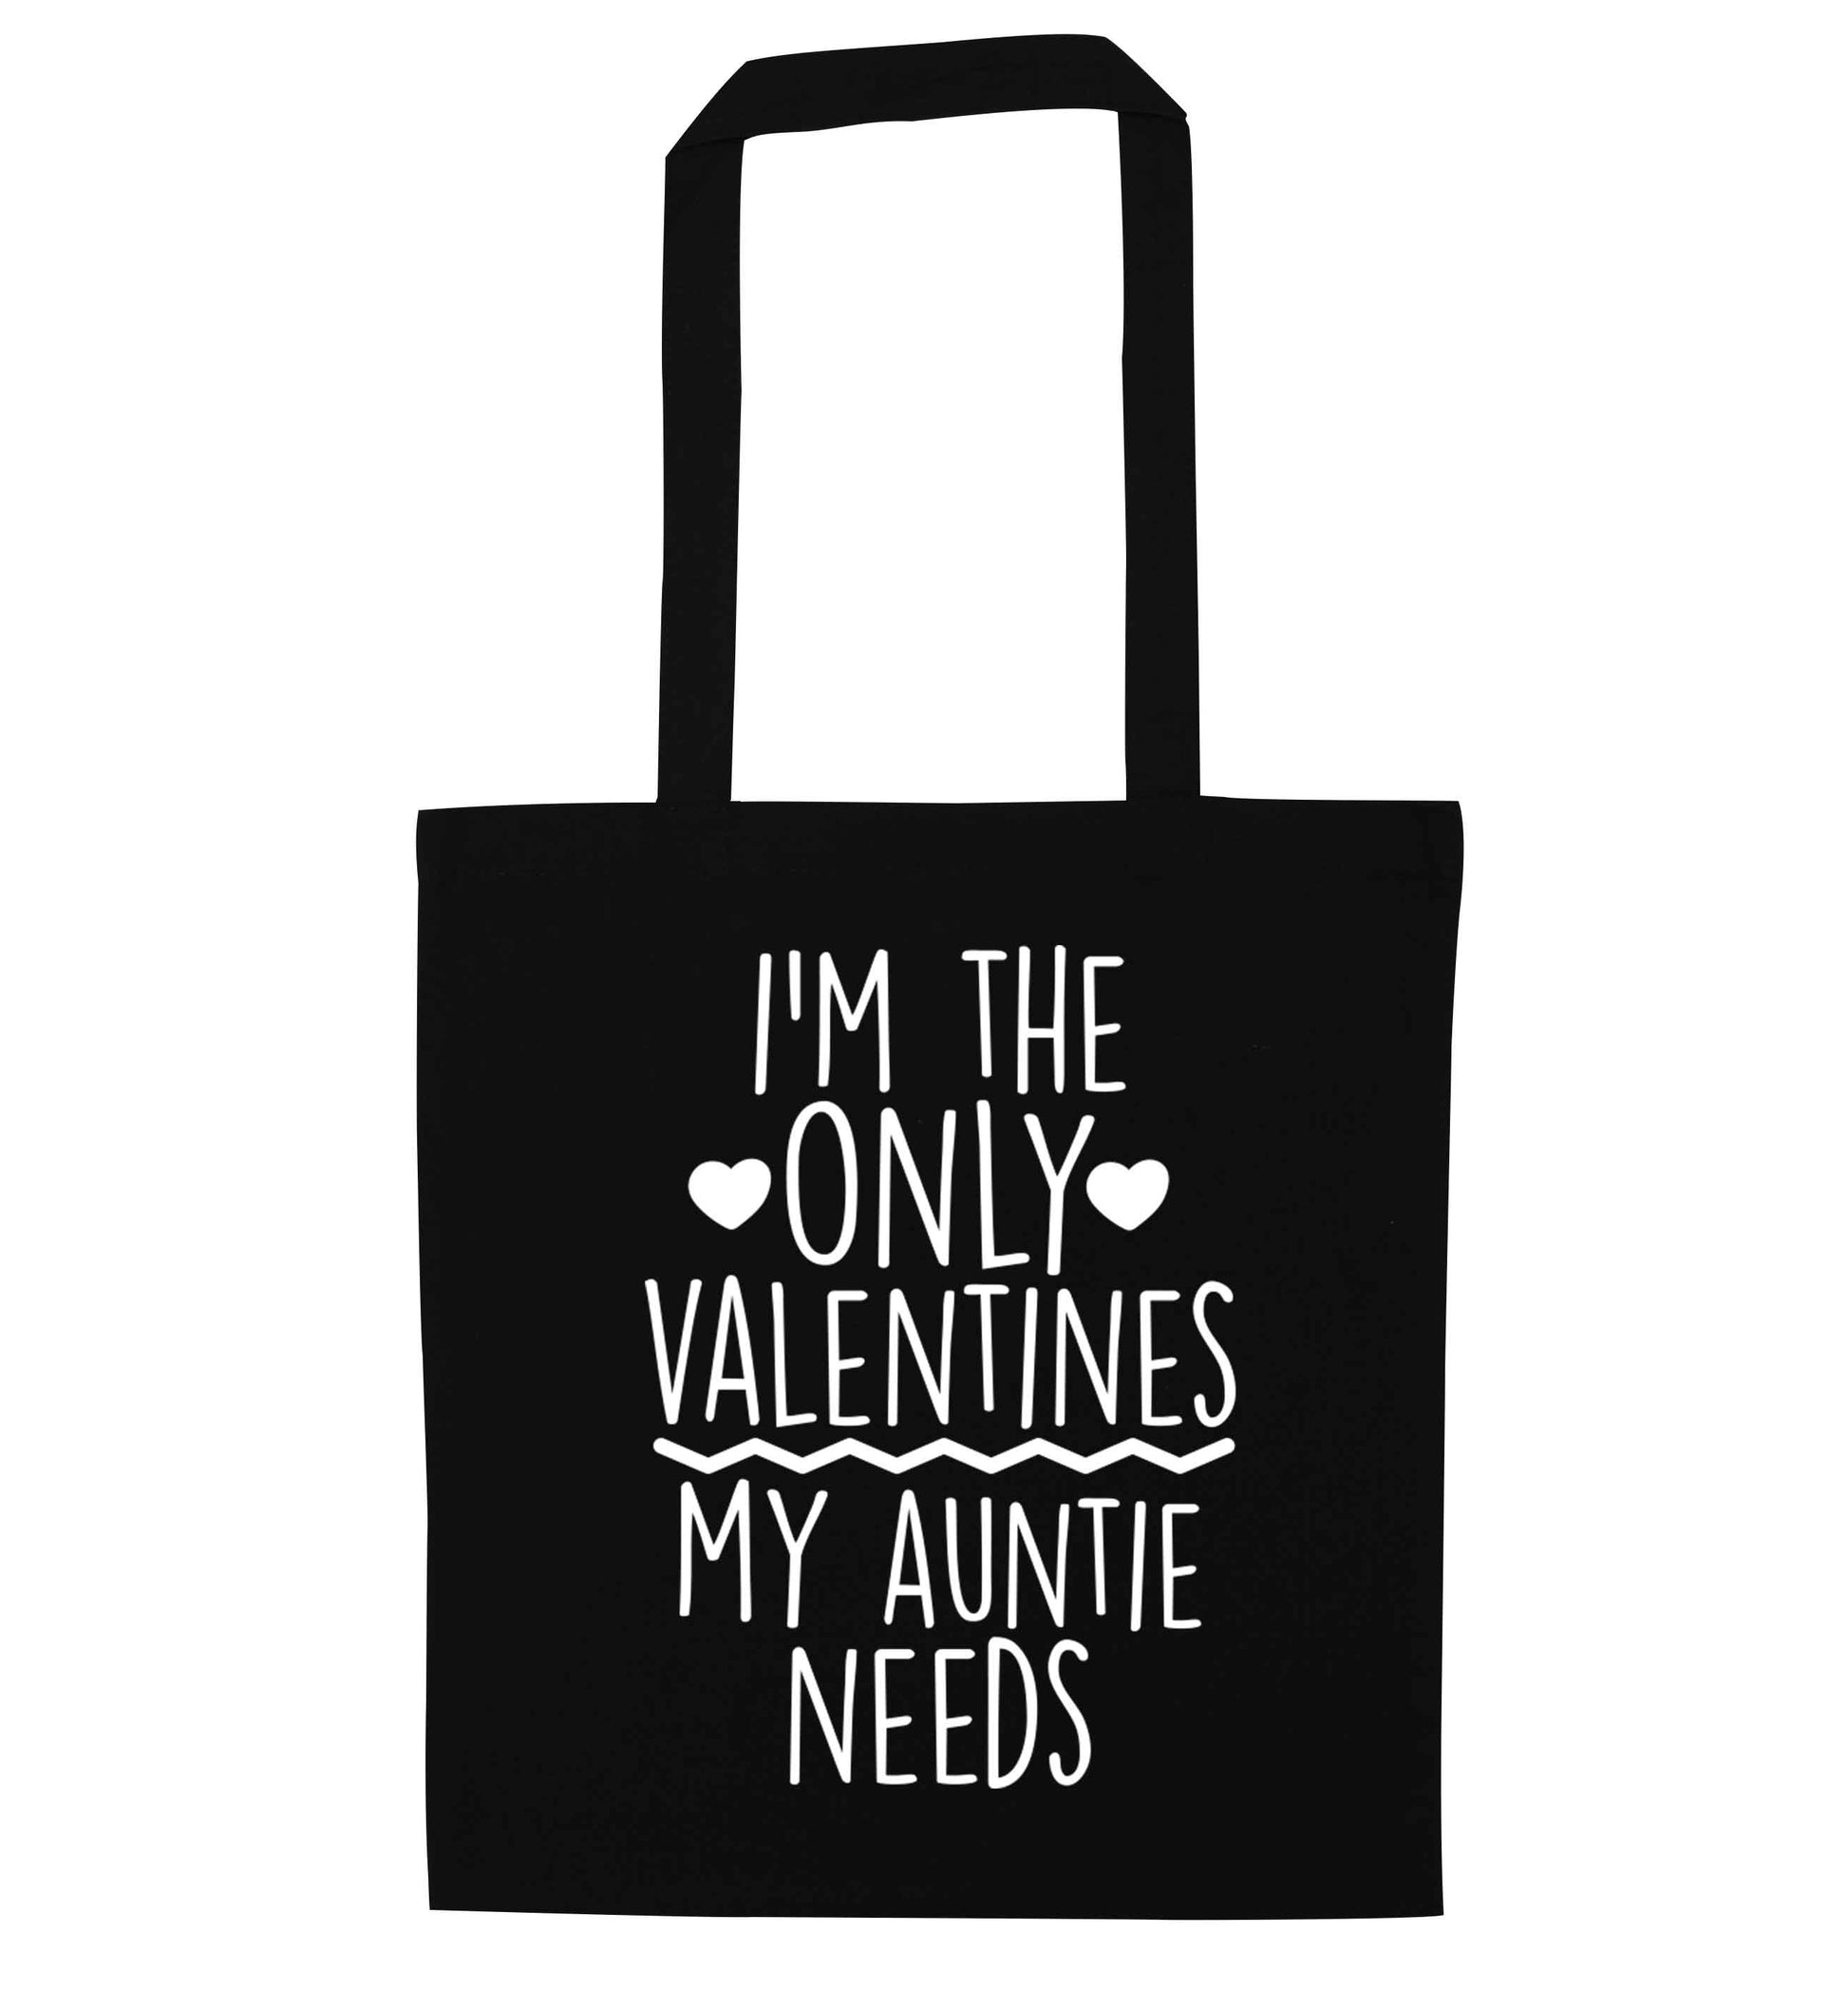 I'm the only valentines my auntie needs black tote bag